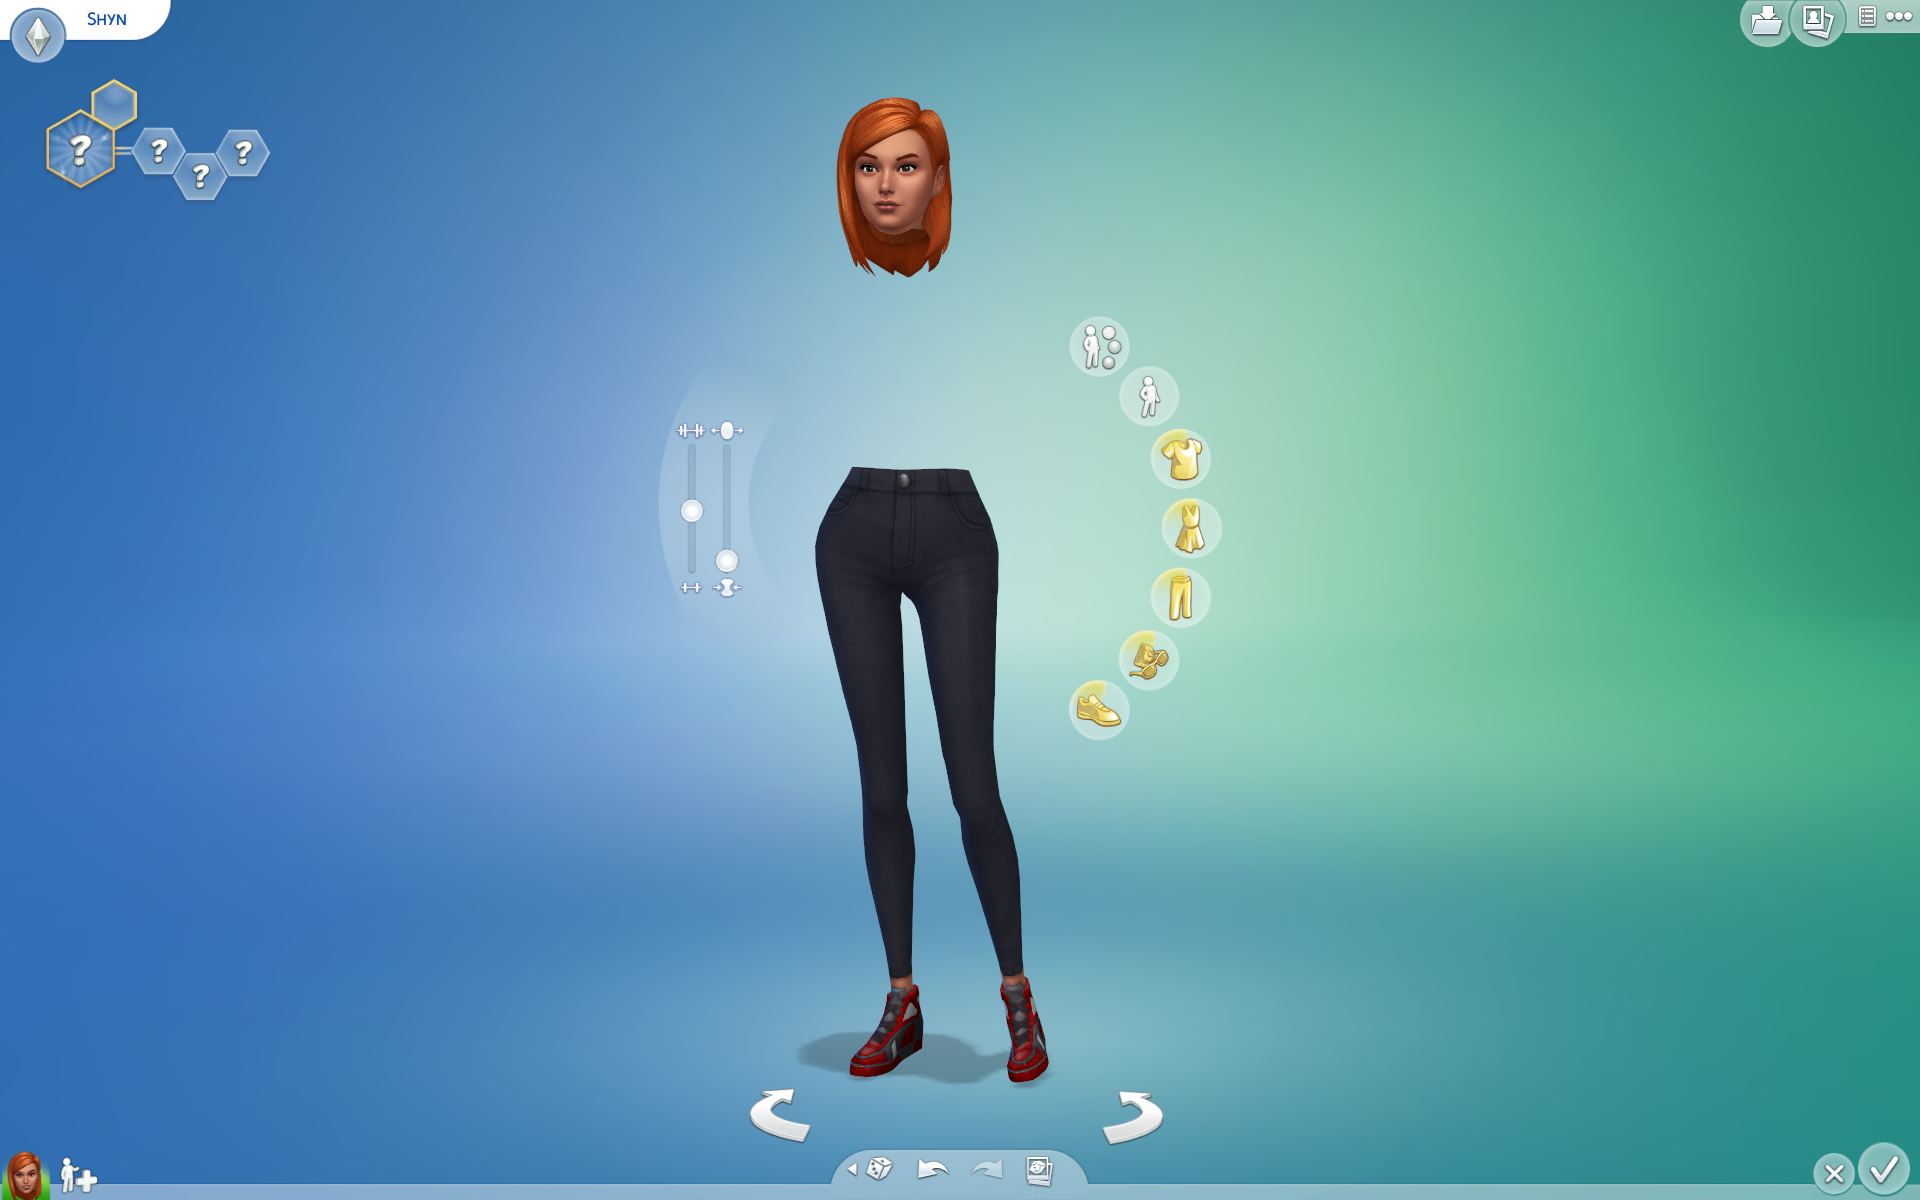 The Sims 4 Folder Is Missing Technical Support Wickedwhims 